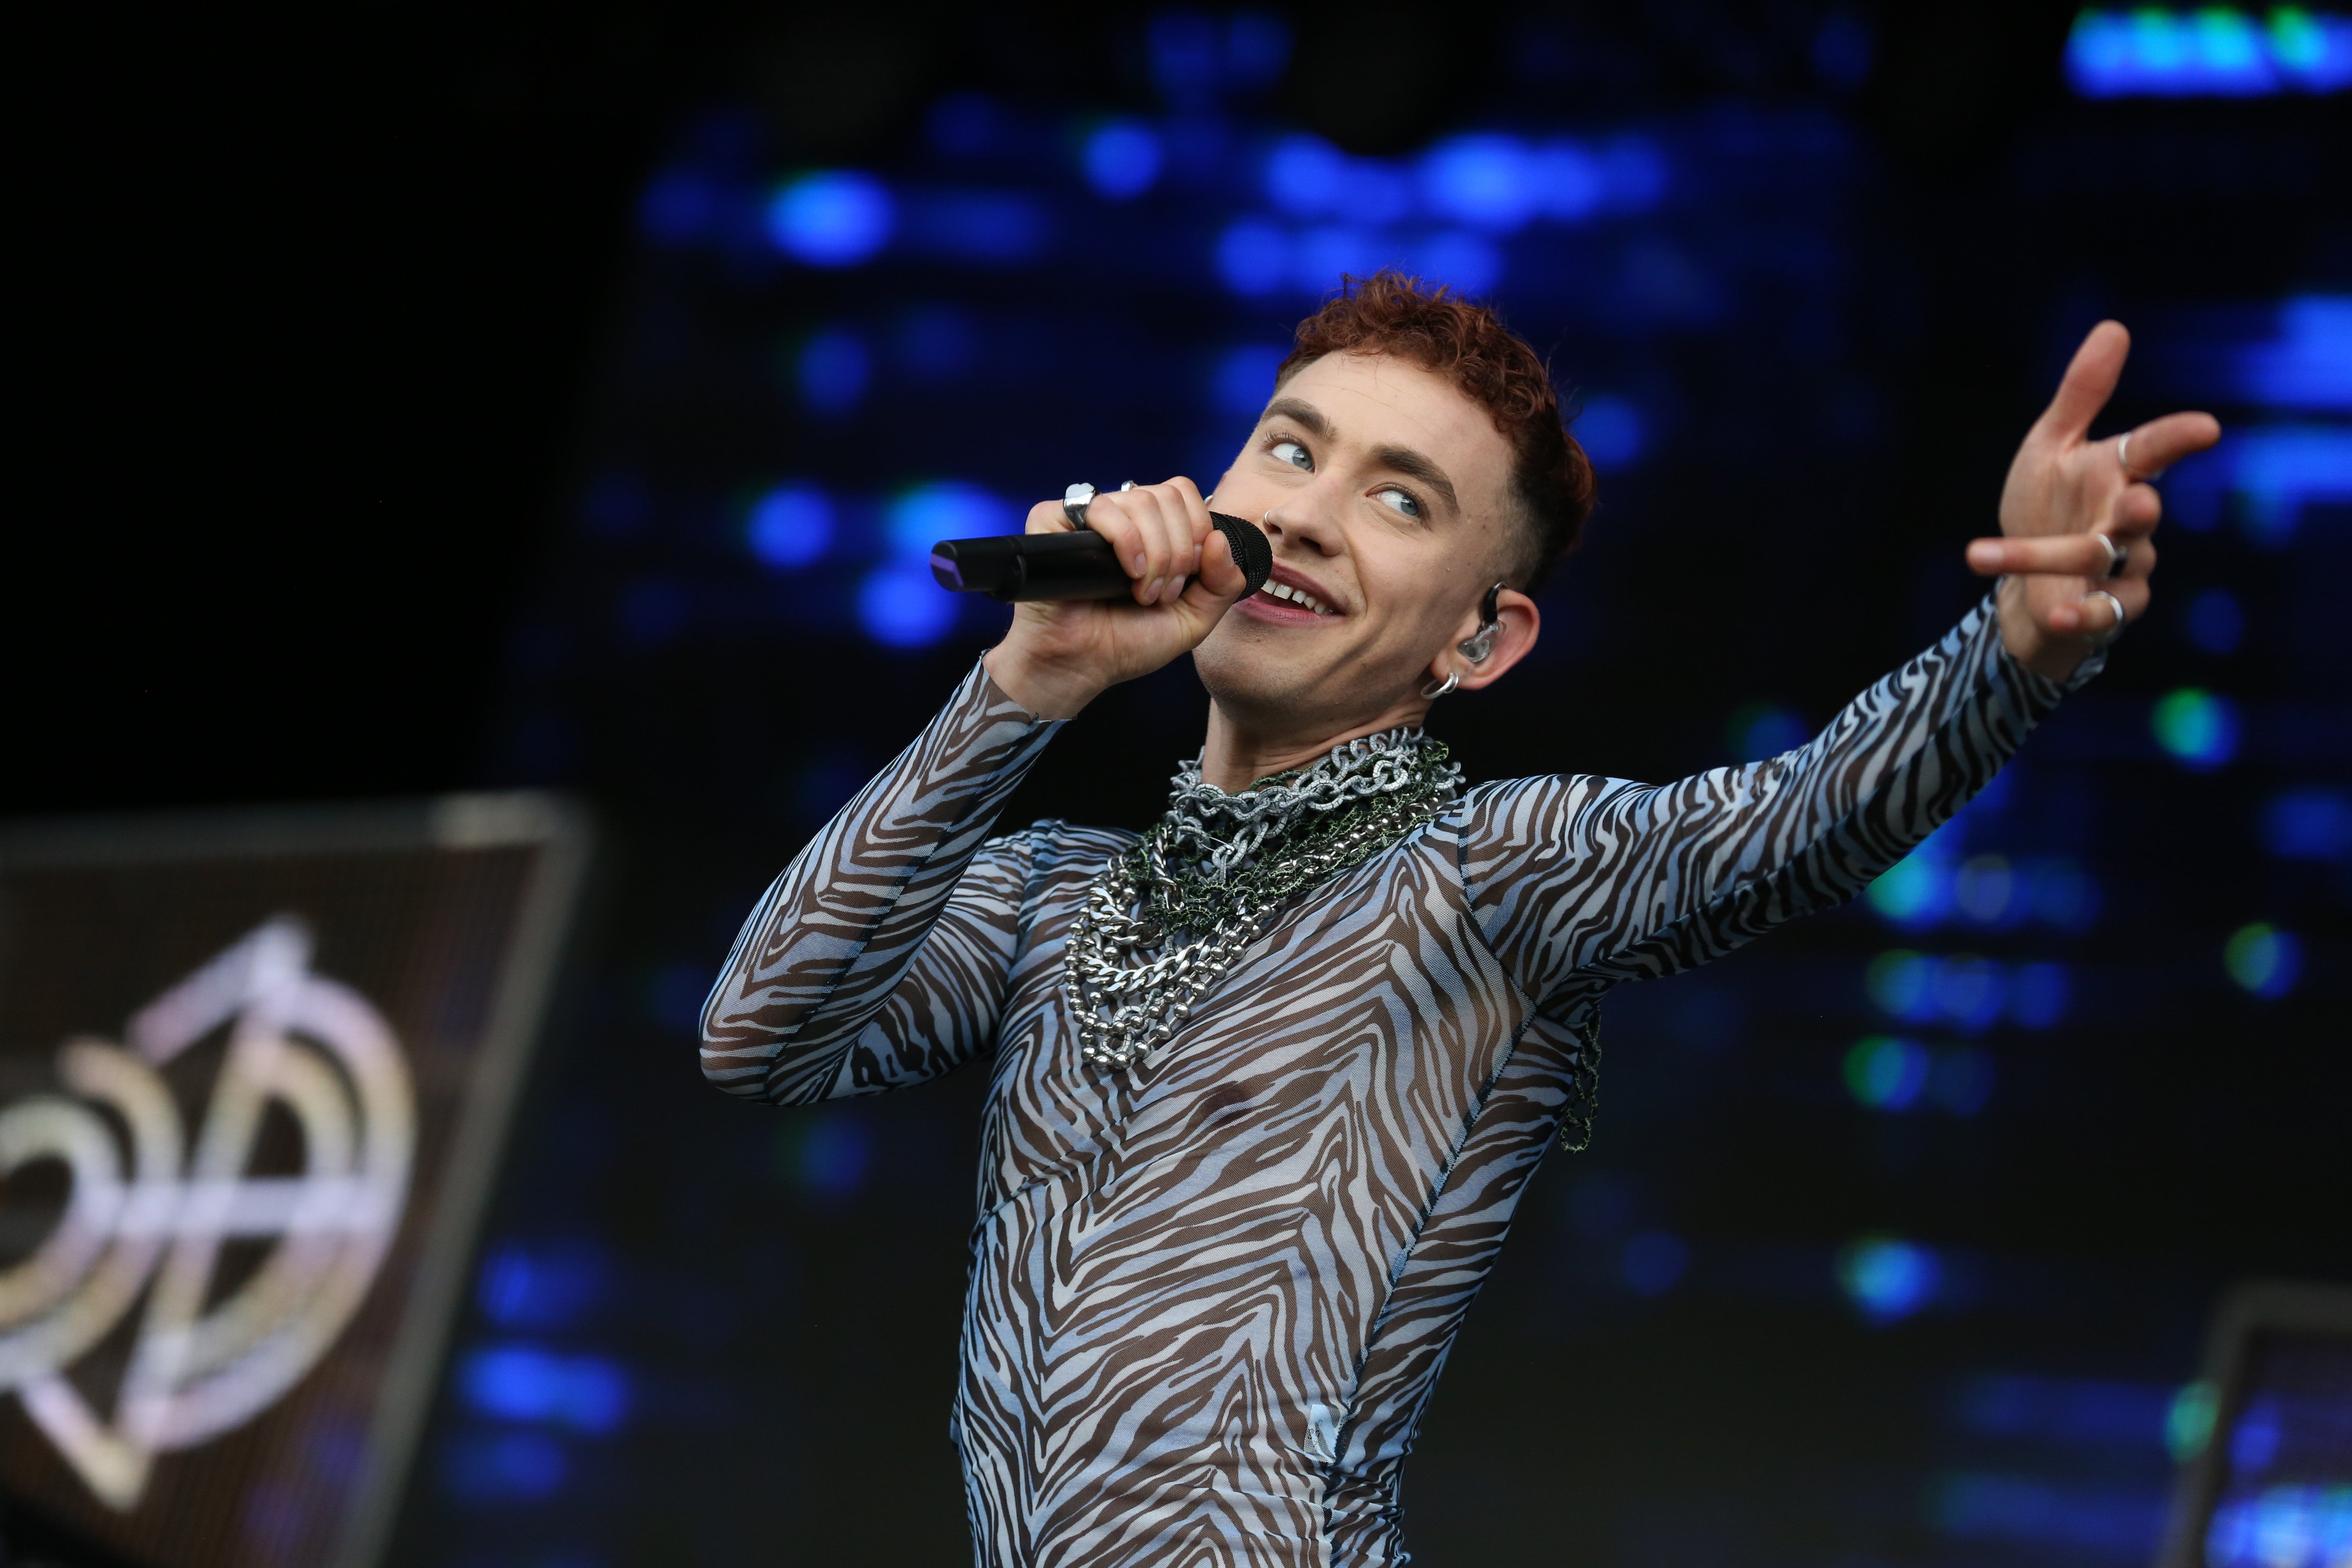 Olly Alexander is representing the UK at Eurovision